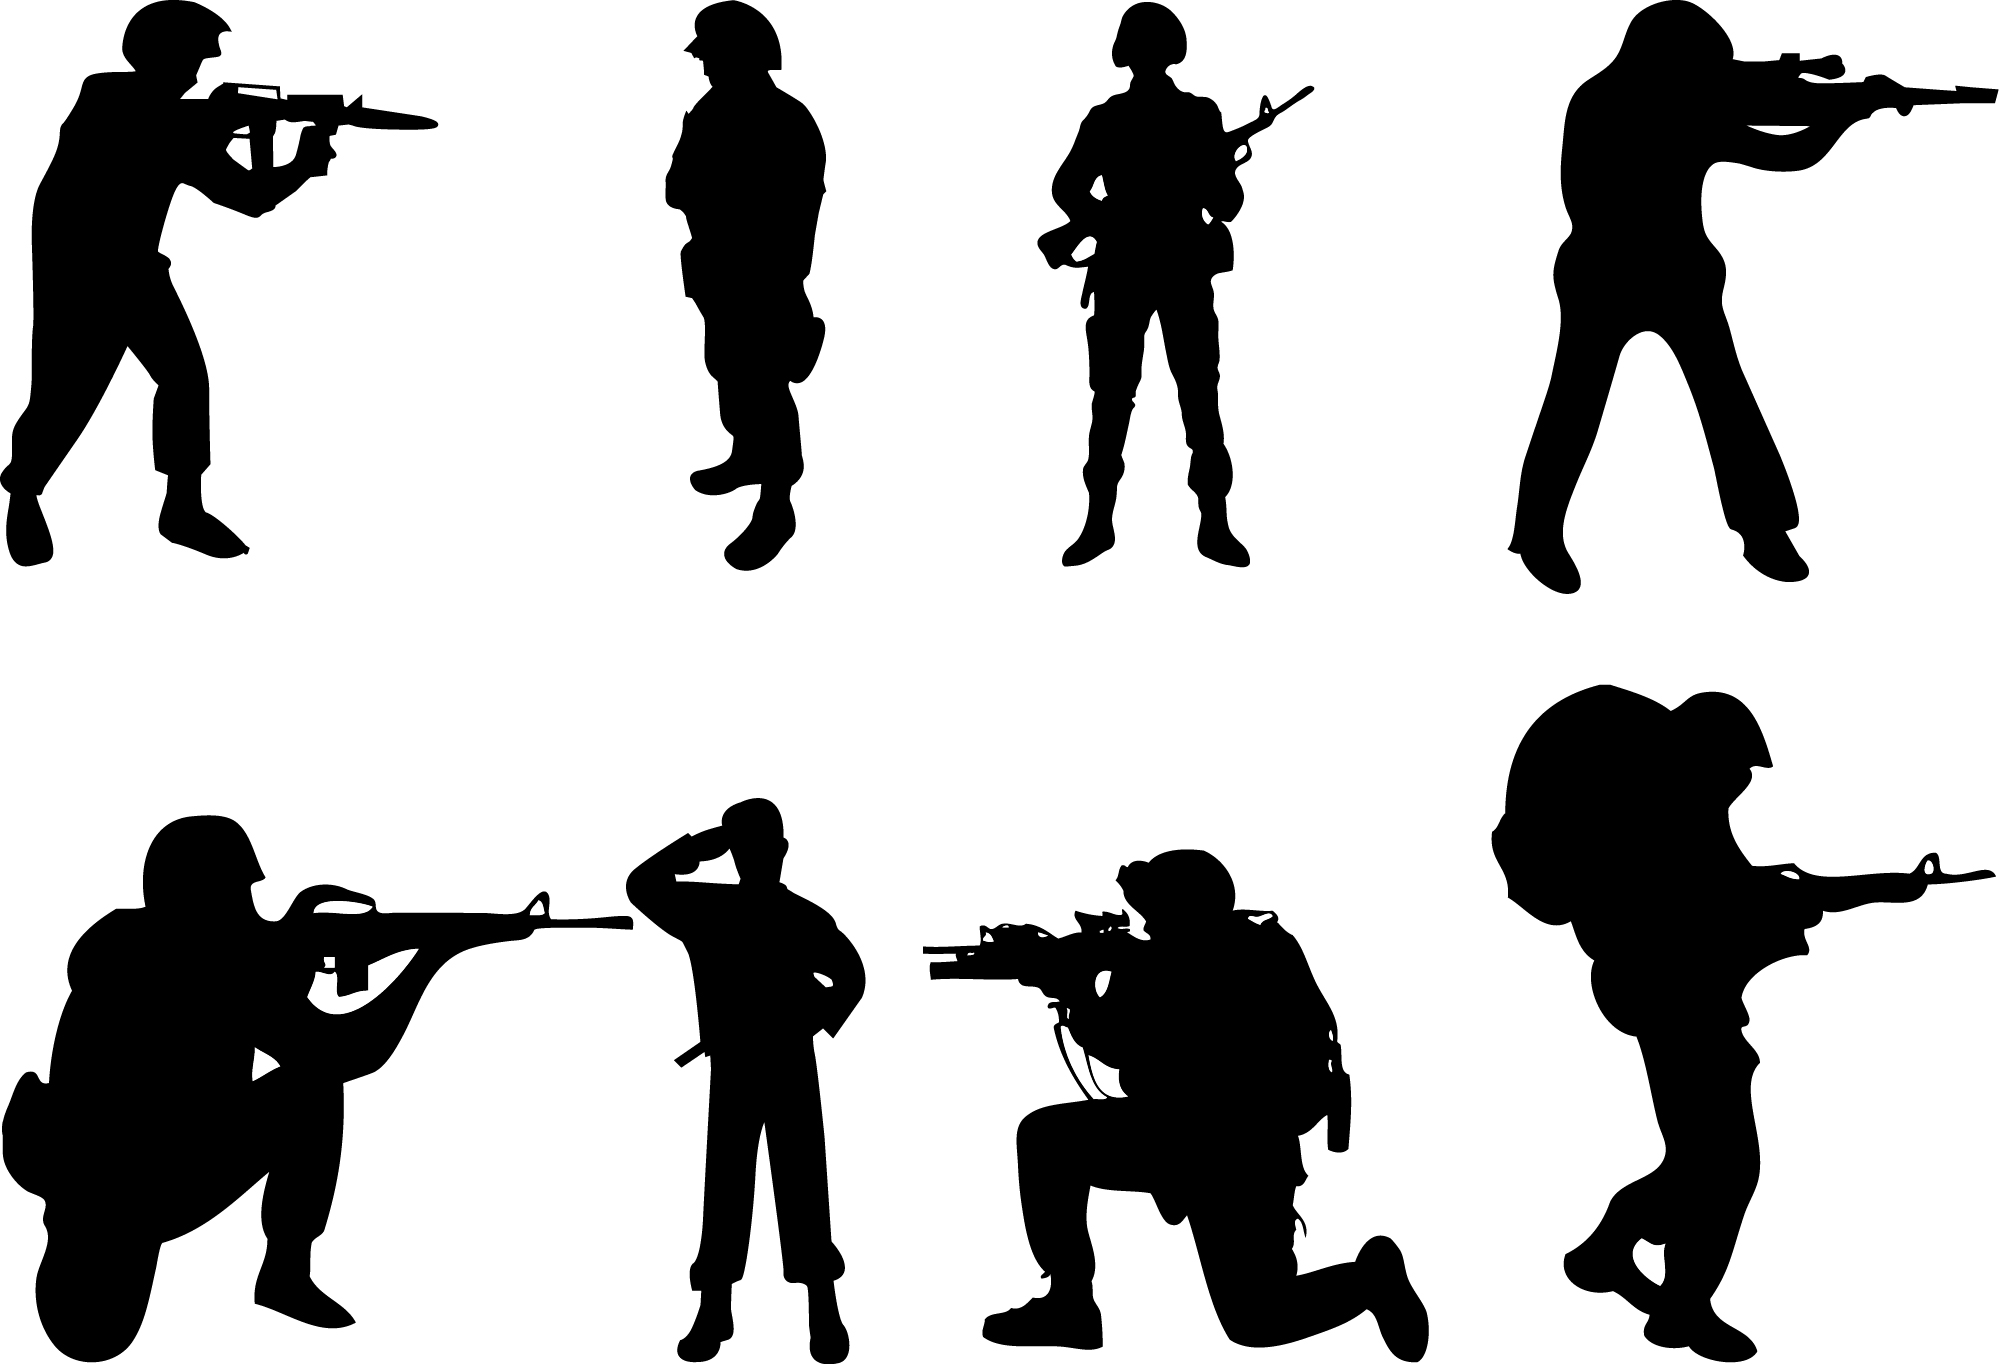 Soldier Black And White Cliparts, Stock Vector and Royalty Free